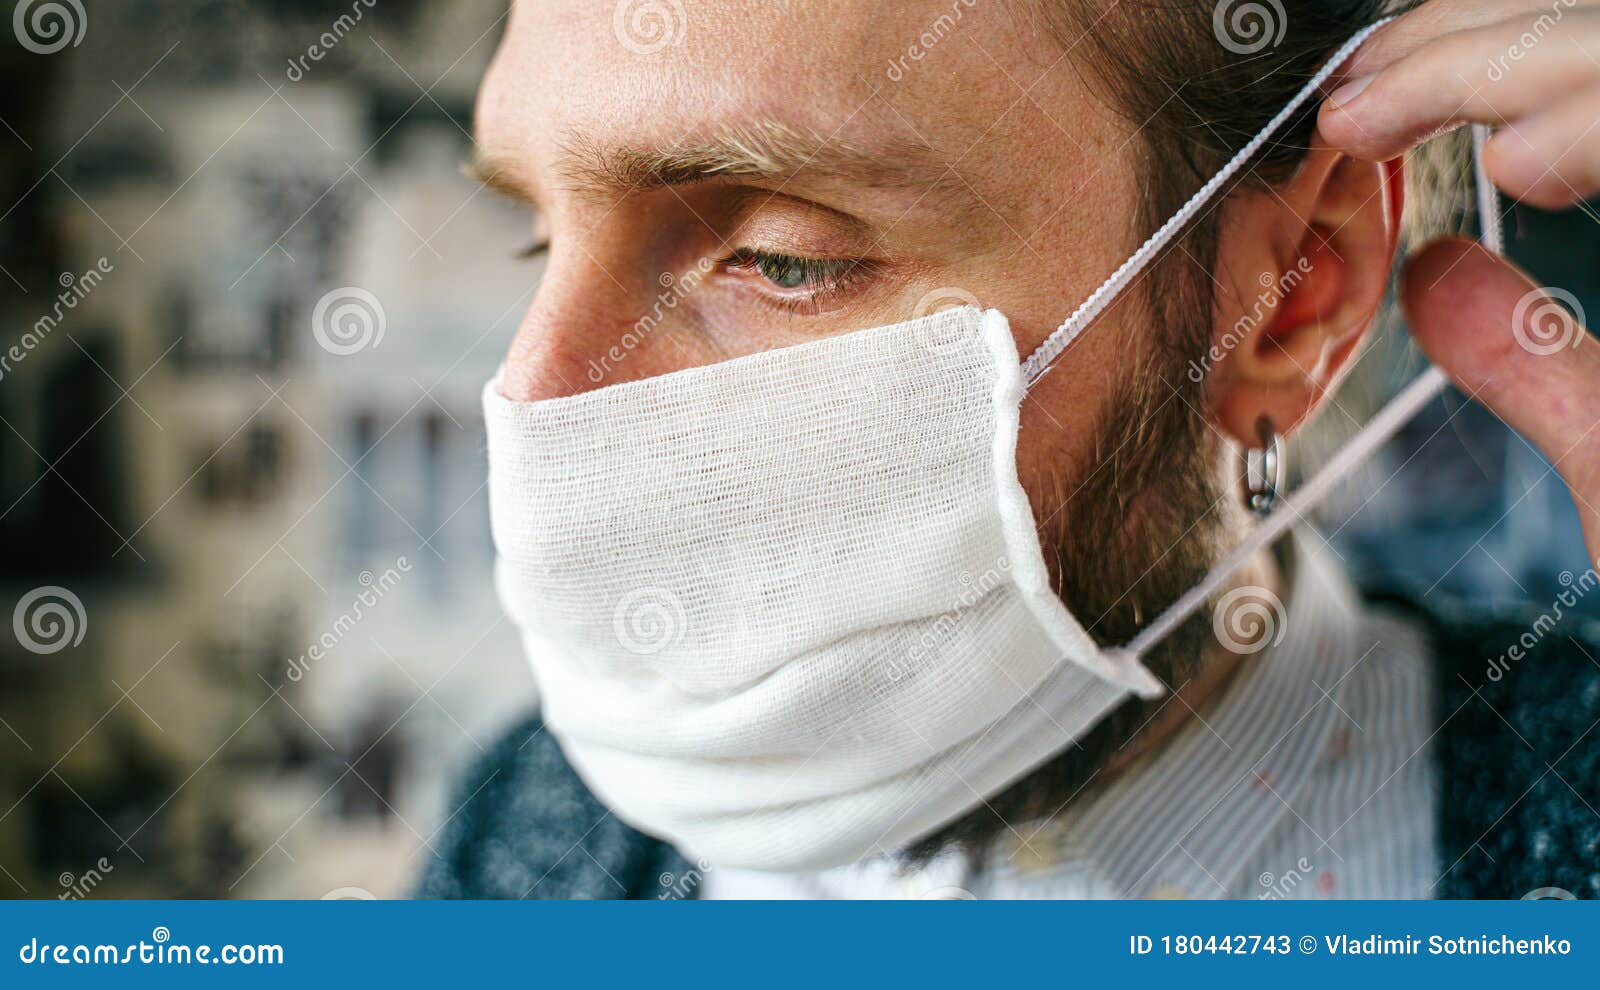 A Bearded Man Puts on a Gauze Mask Stock Image - Image of face ...